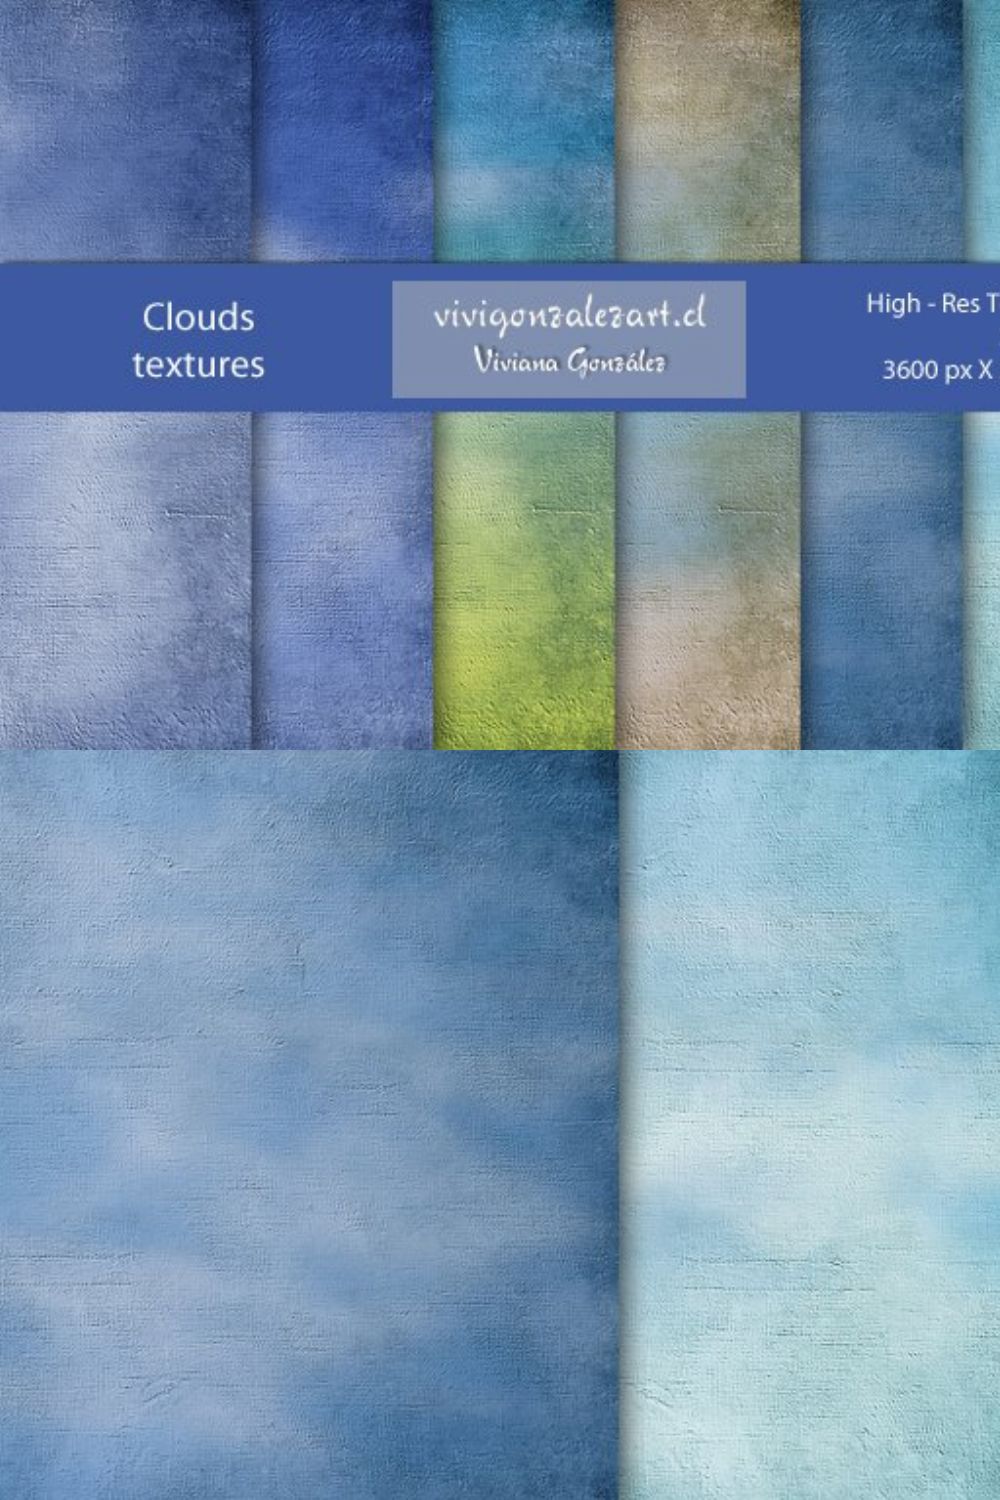 Clouds textures pinterest preview image.